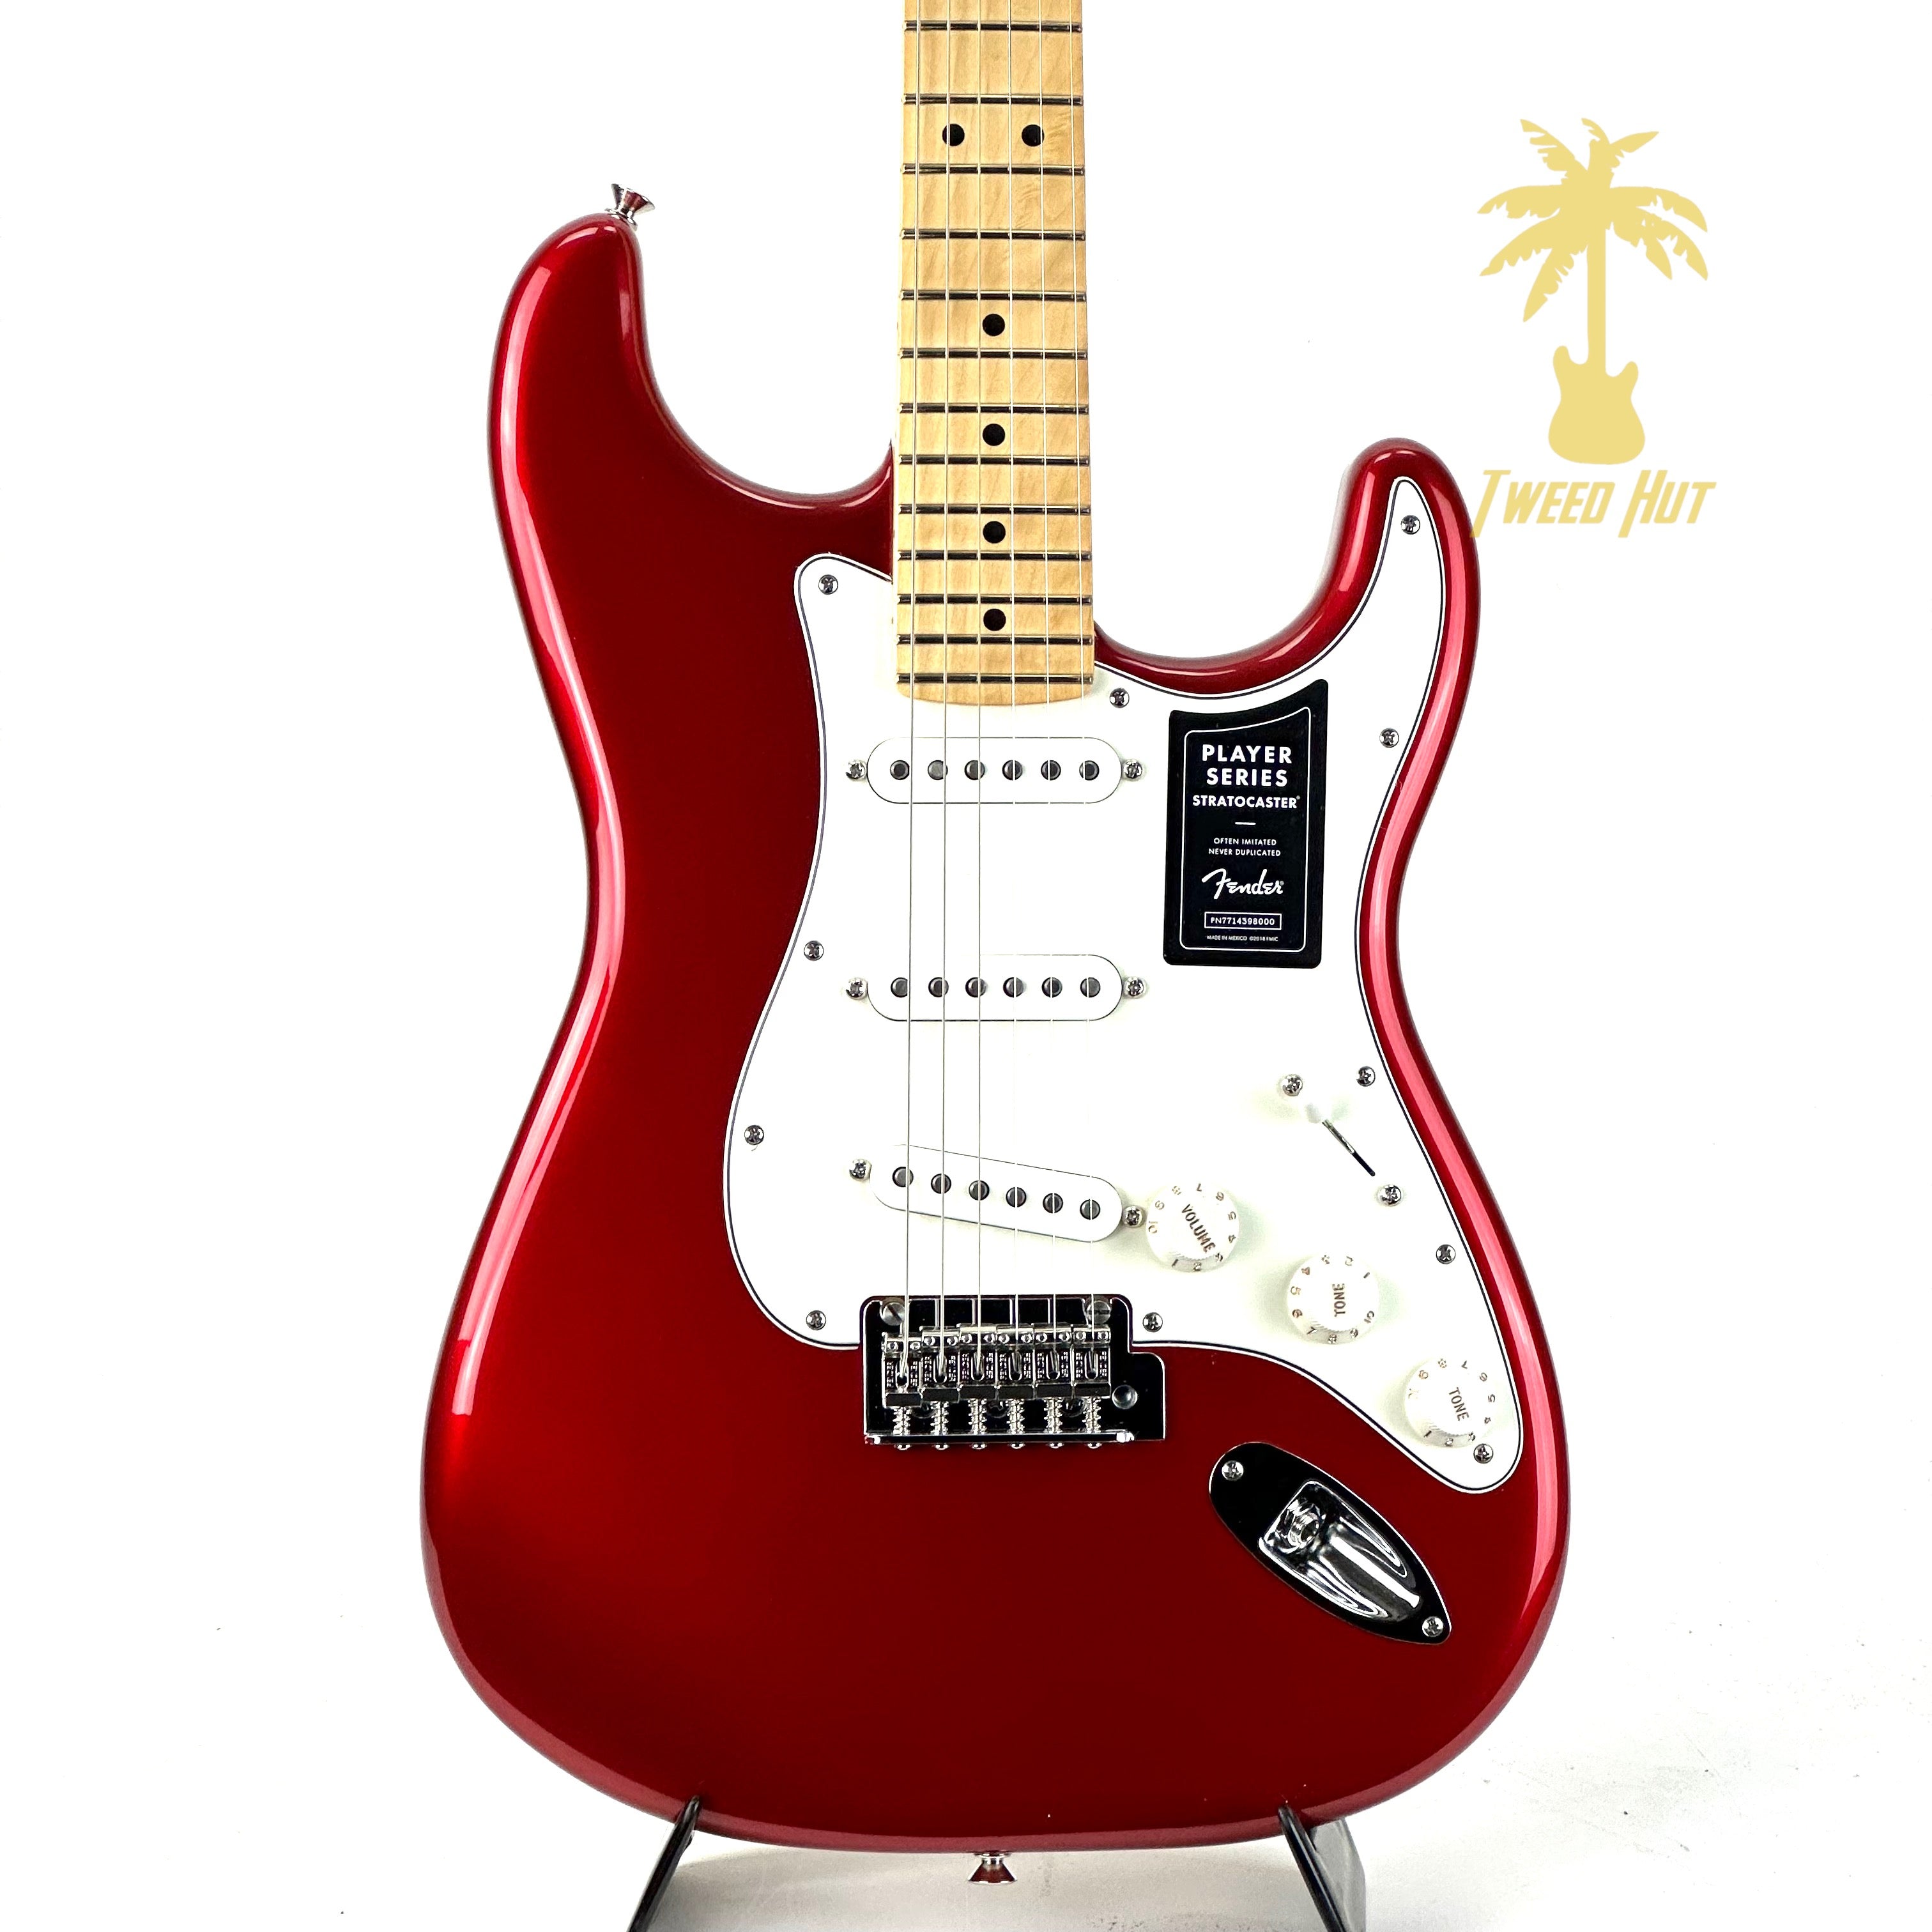 FENDER PLAYER STRATOCASTER MAPLE NECK CANDY APPLE RED